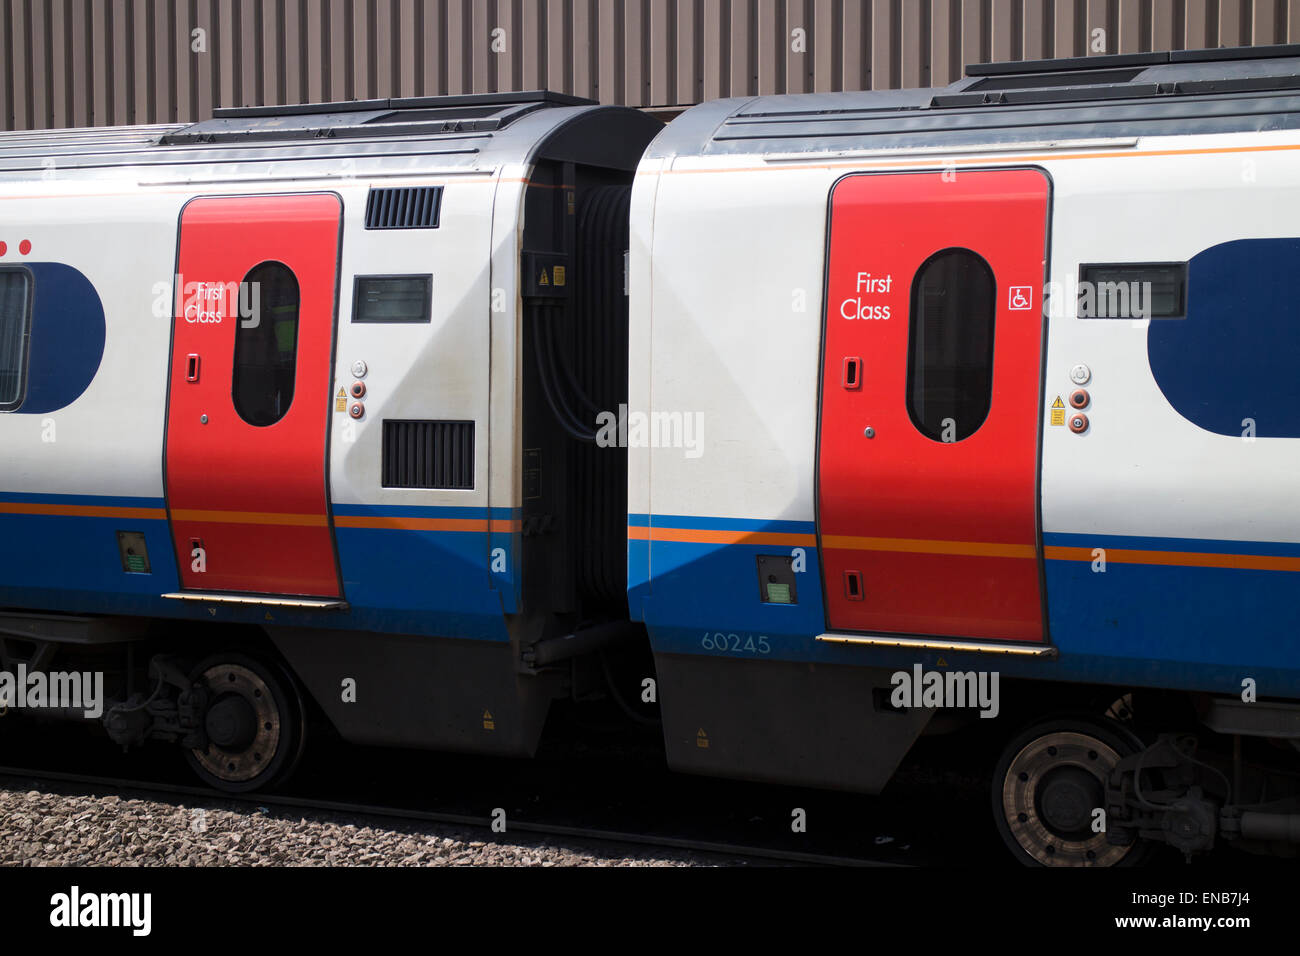 First Class carriages on an East Midlands train Stock Photo